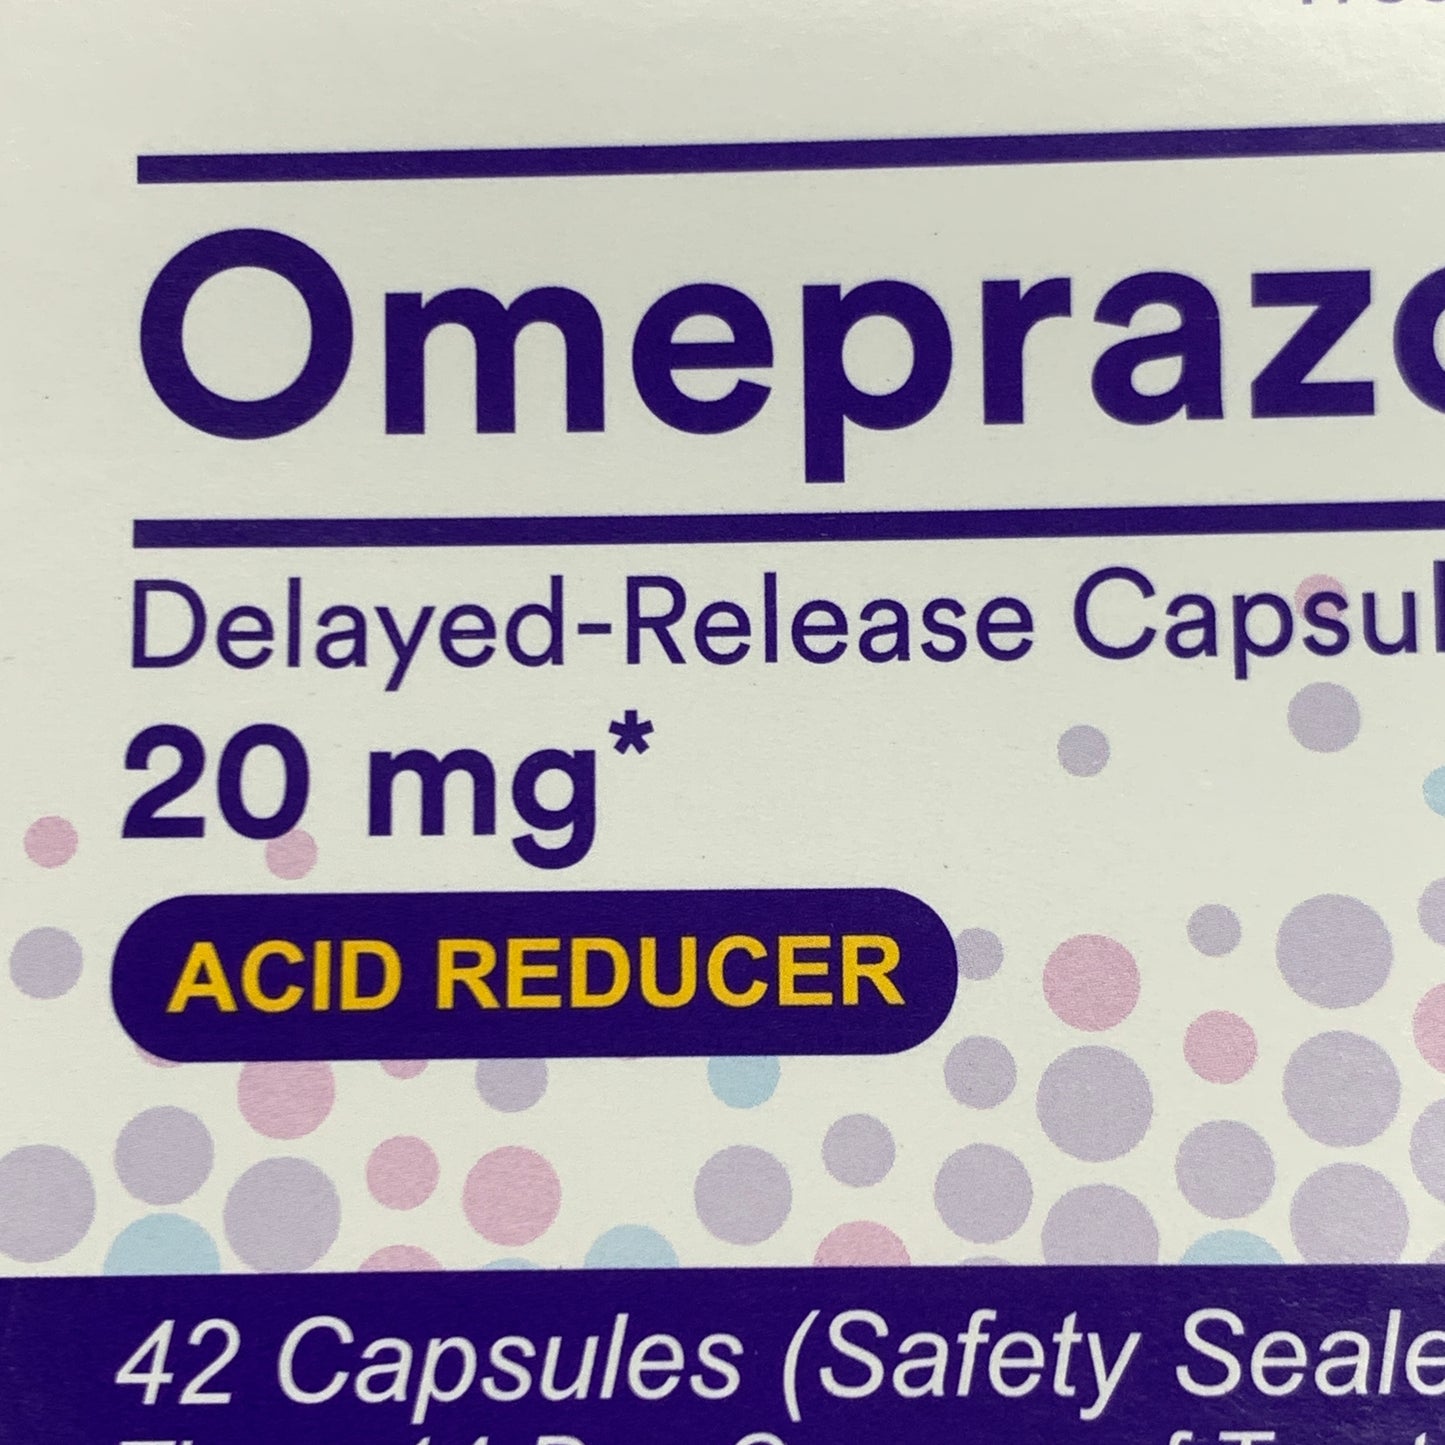 ZA@ DR.REDDY'S 6 BOXES! (18 Bottles) Omeprazole 20 mg Acid Reducer 756 CAPSULES (AS-IS)